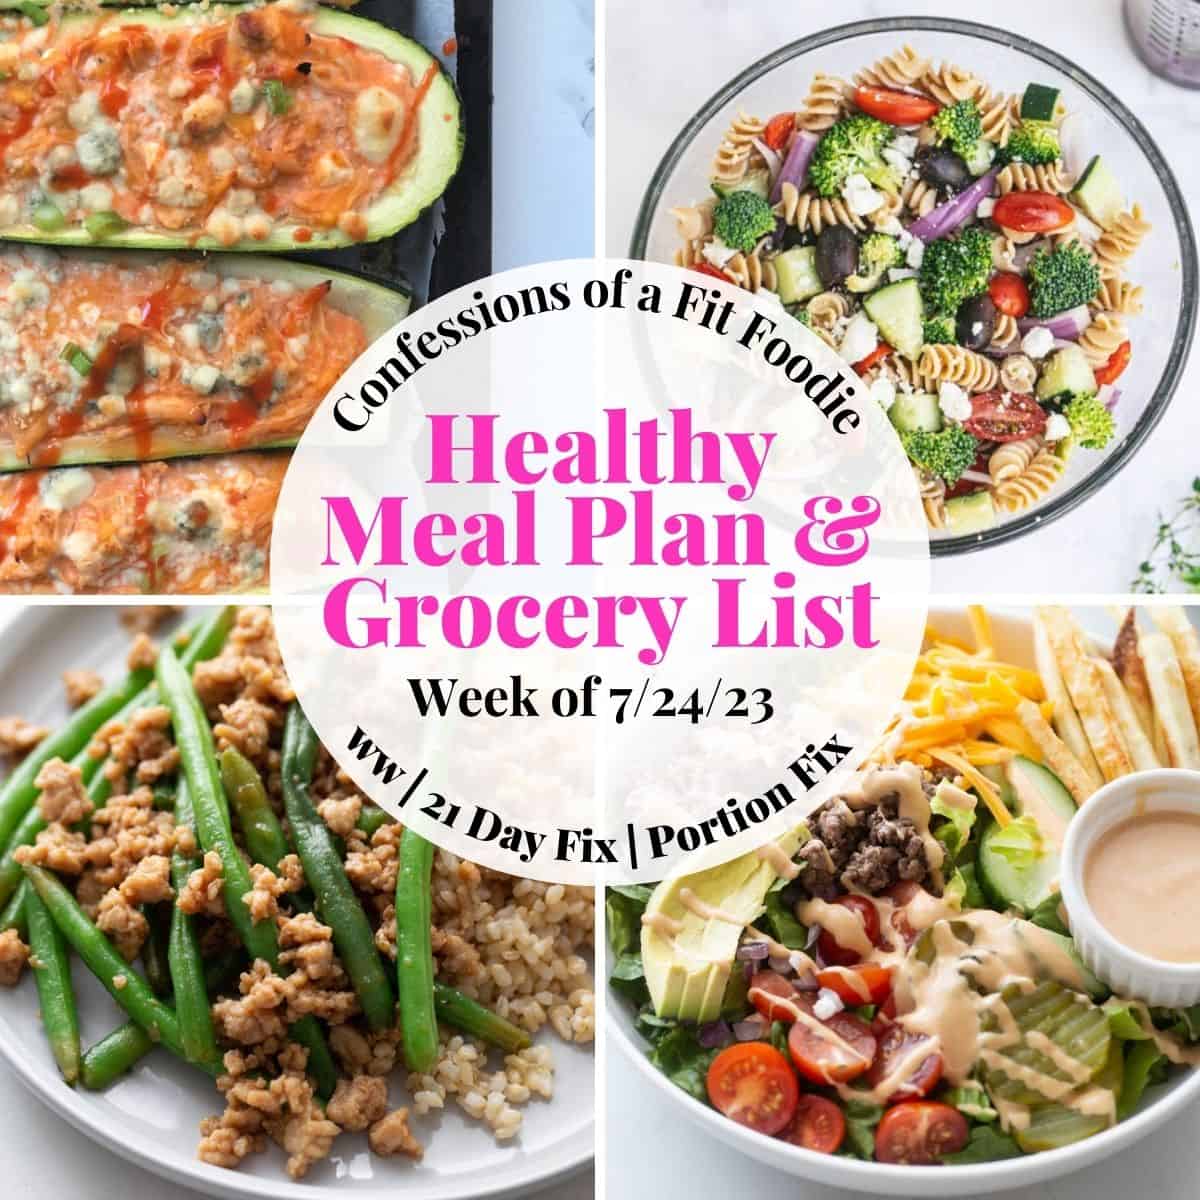 Food photo collage with pink and black text on a white circle. Text says, "Healthy Meal Plan & Grocery List Week of 7/24/23"